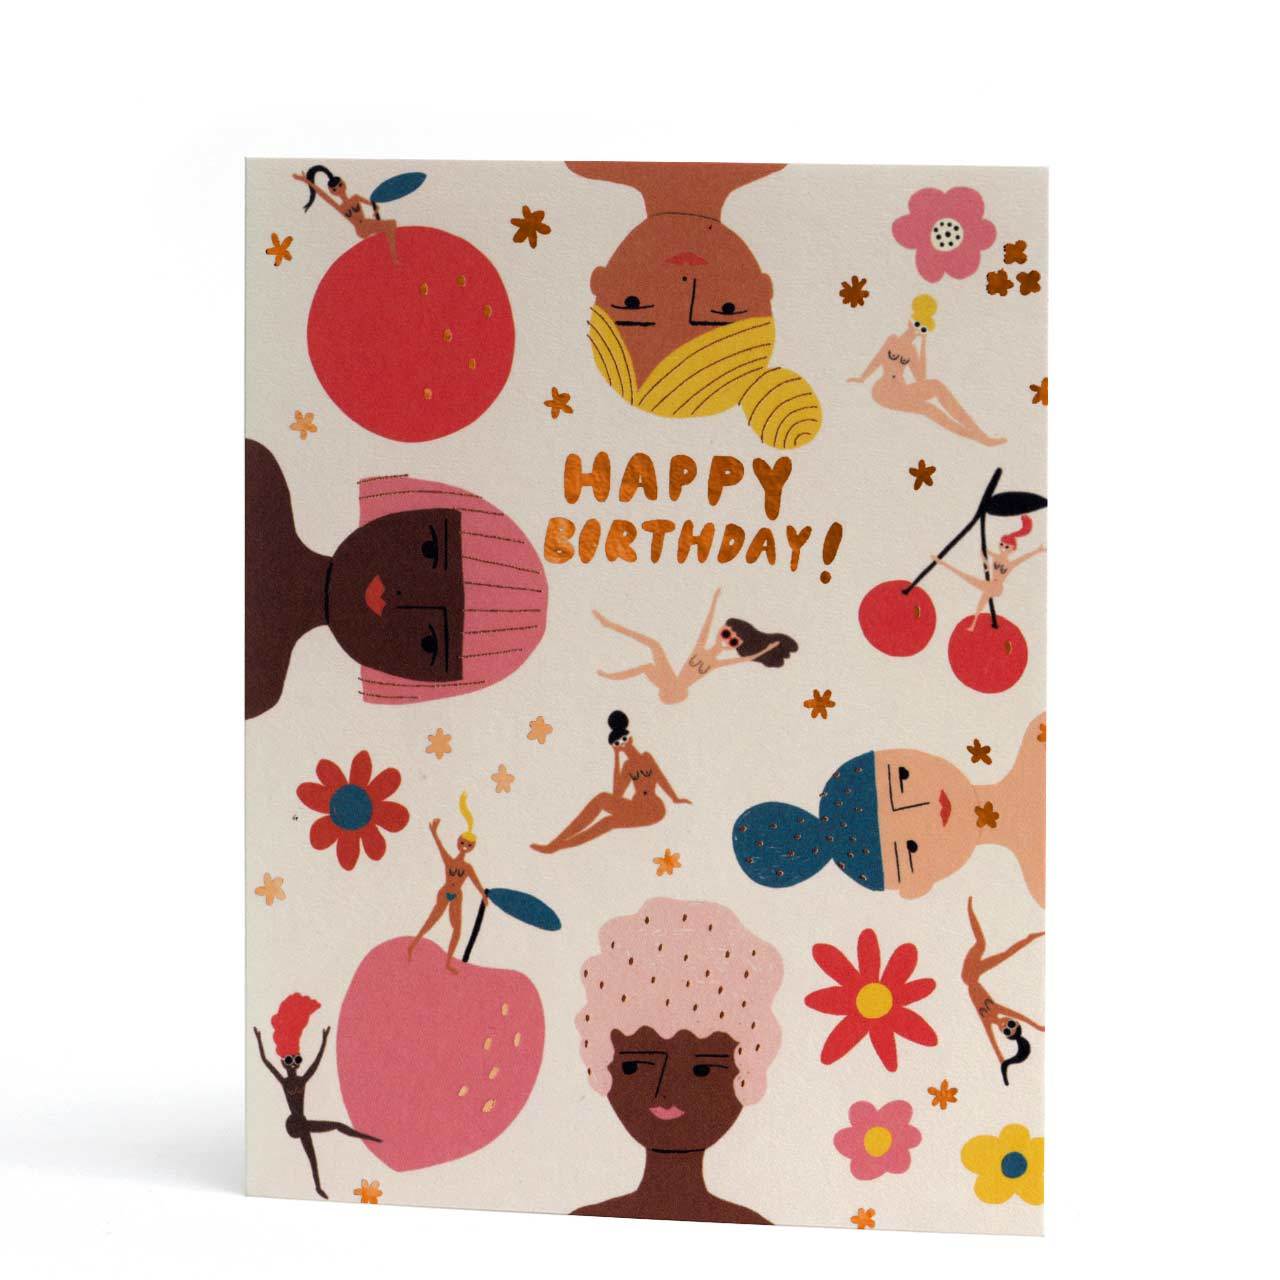 Fruity Nudes Copper Foil Birthday Card